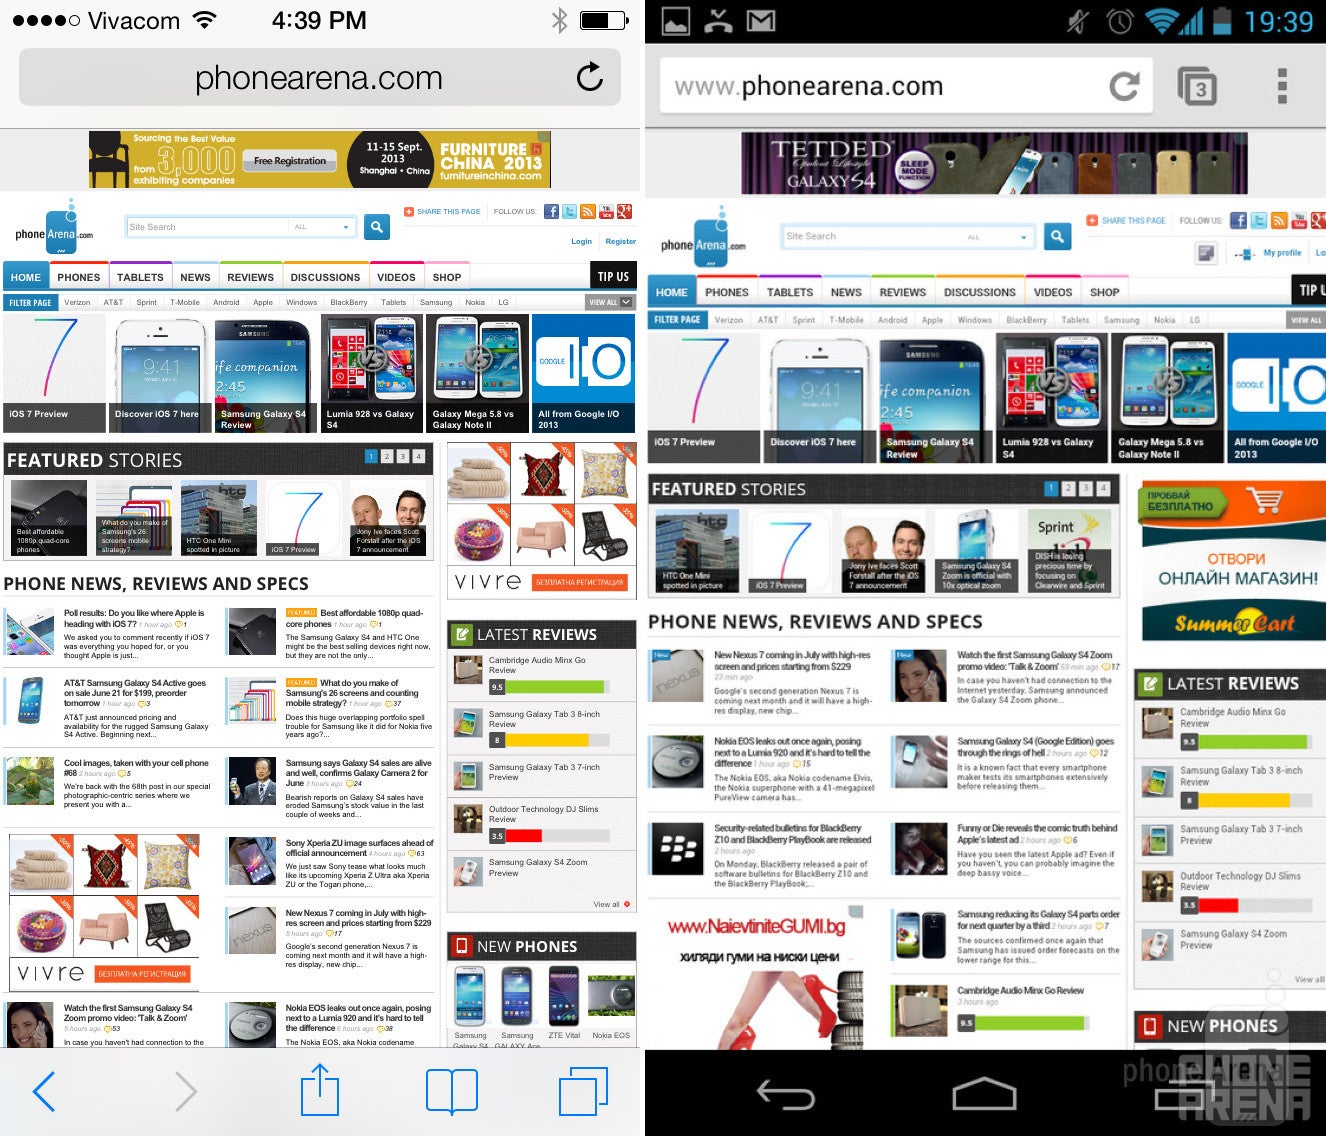 iOS 7: how does it stack up against Android?